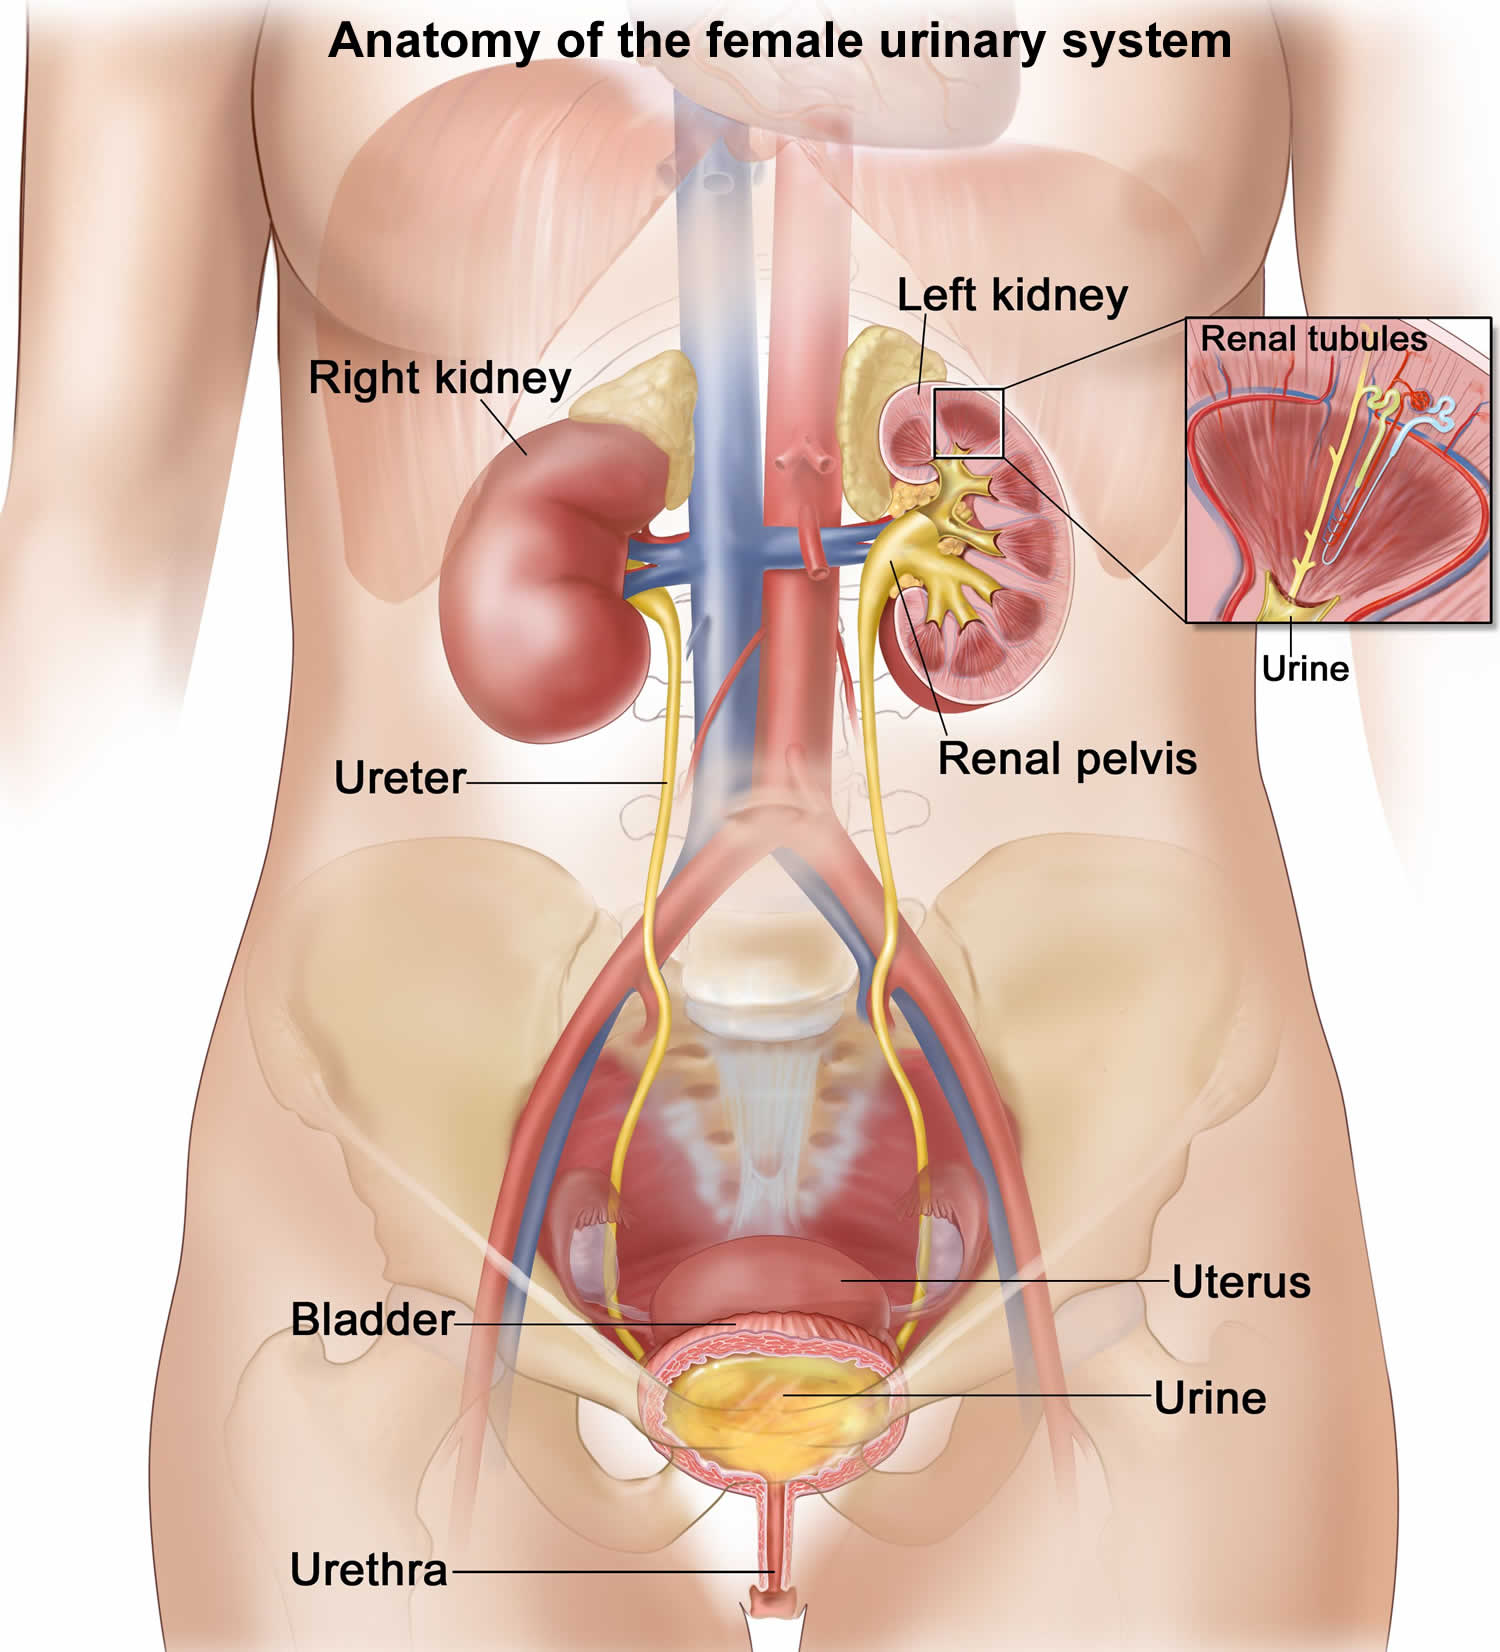 Anatomy of the female urinary system